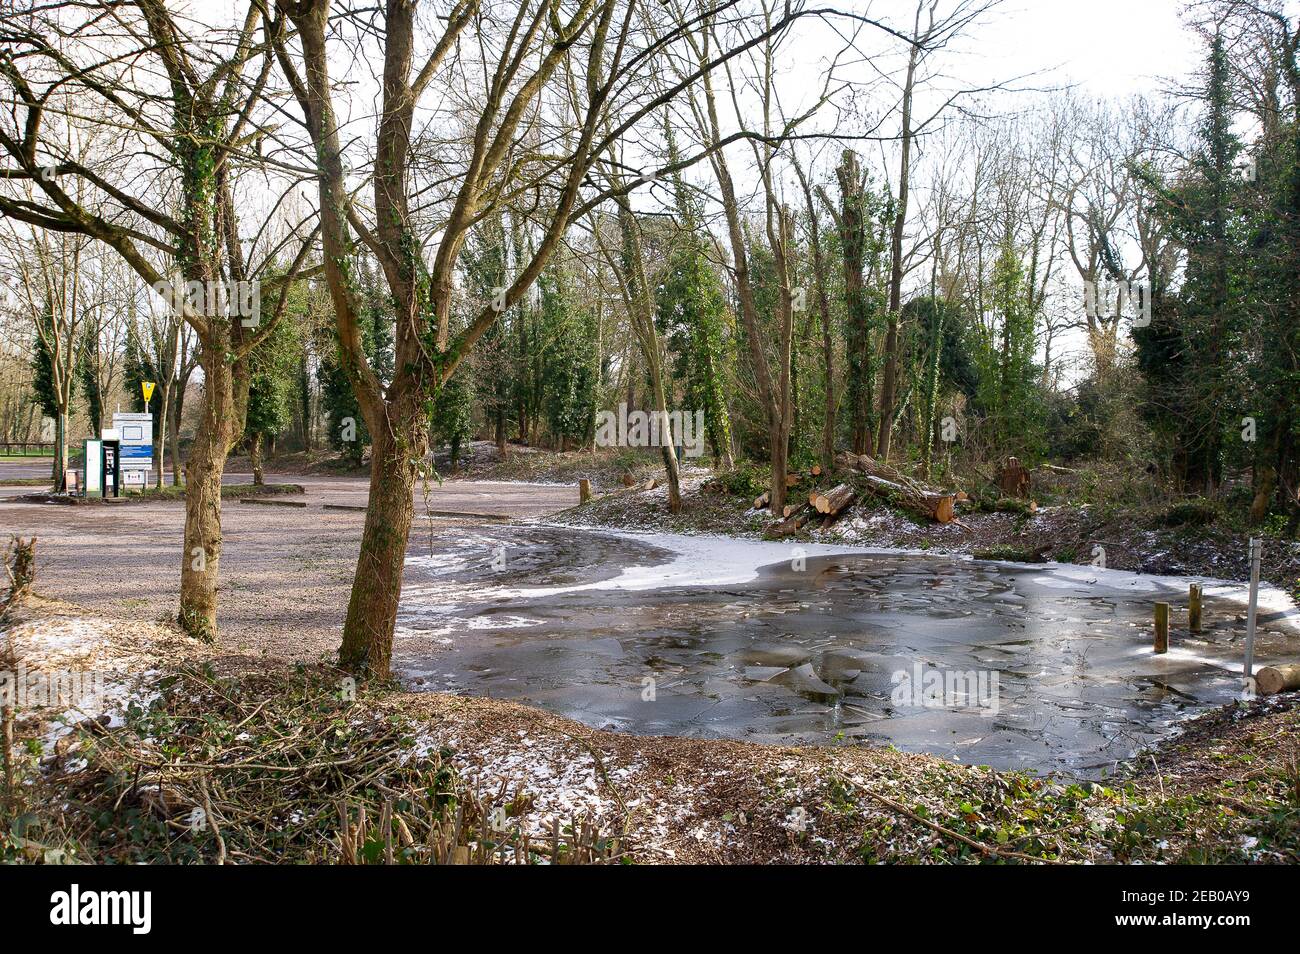 Denham, Buckinghamshire, UK. 11th February, 2021. Frozen water in one of the car parks at Denham Country Park. Following recent heavy rainfall the River Colne in Denham Country Park has burst its banks. Due to sustained freezing temperatures, both patches of snow and flooding remain in parts of the park. Credit: Maureen McLean/Alamy Live News Stock Photo